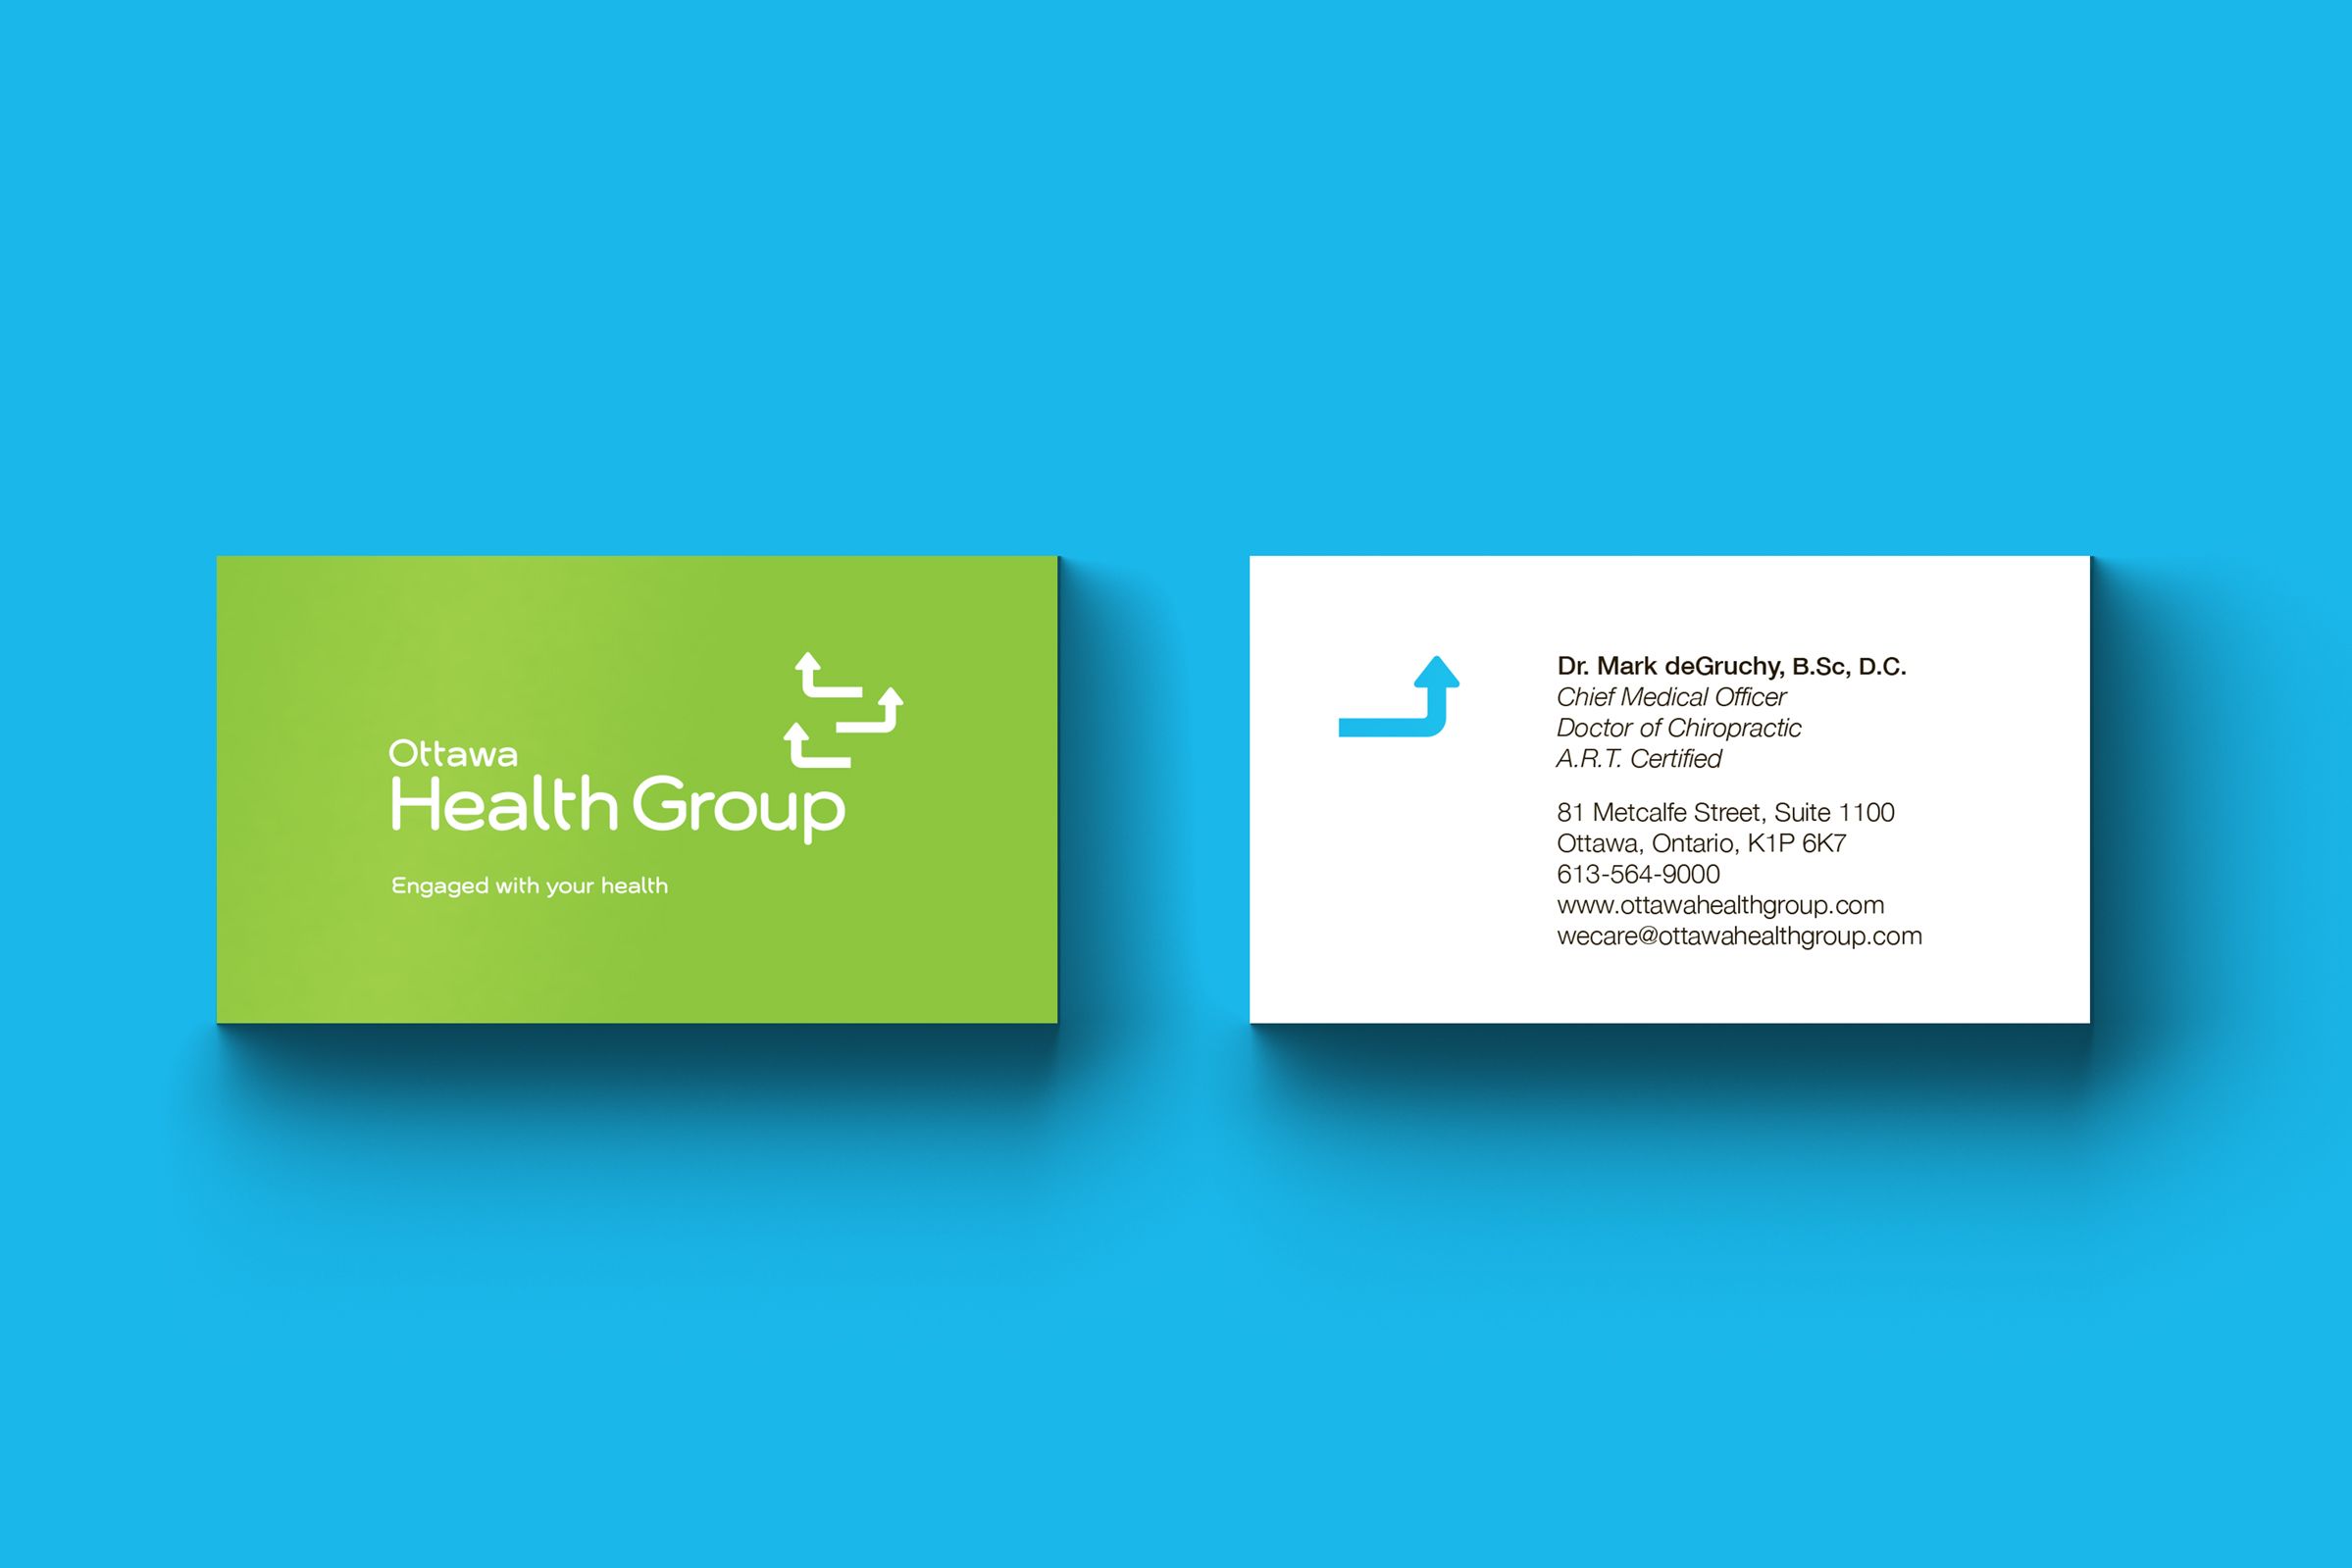 Business Card for Ottawa Health Group, a health care provider by Graphic Designer idApostle